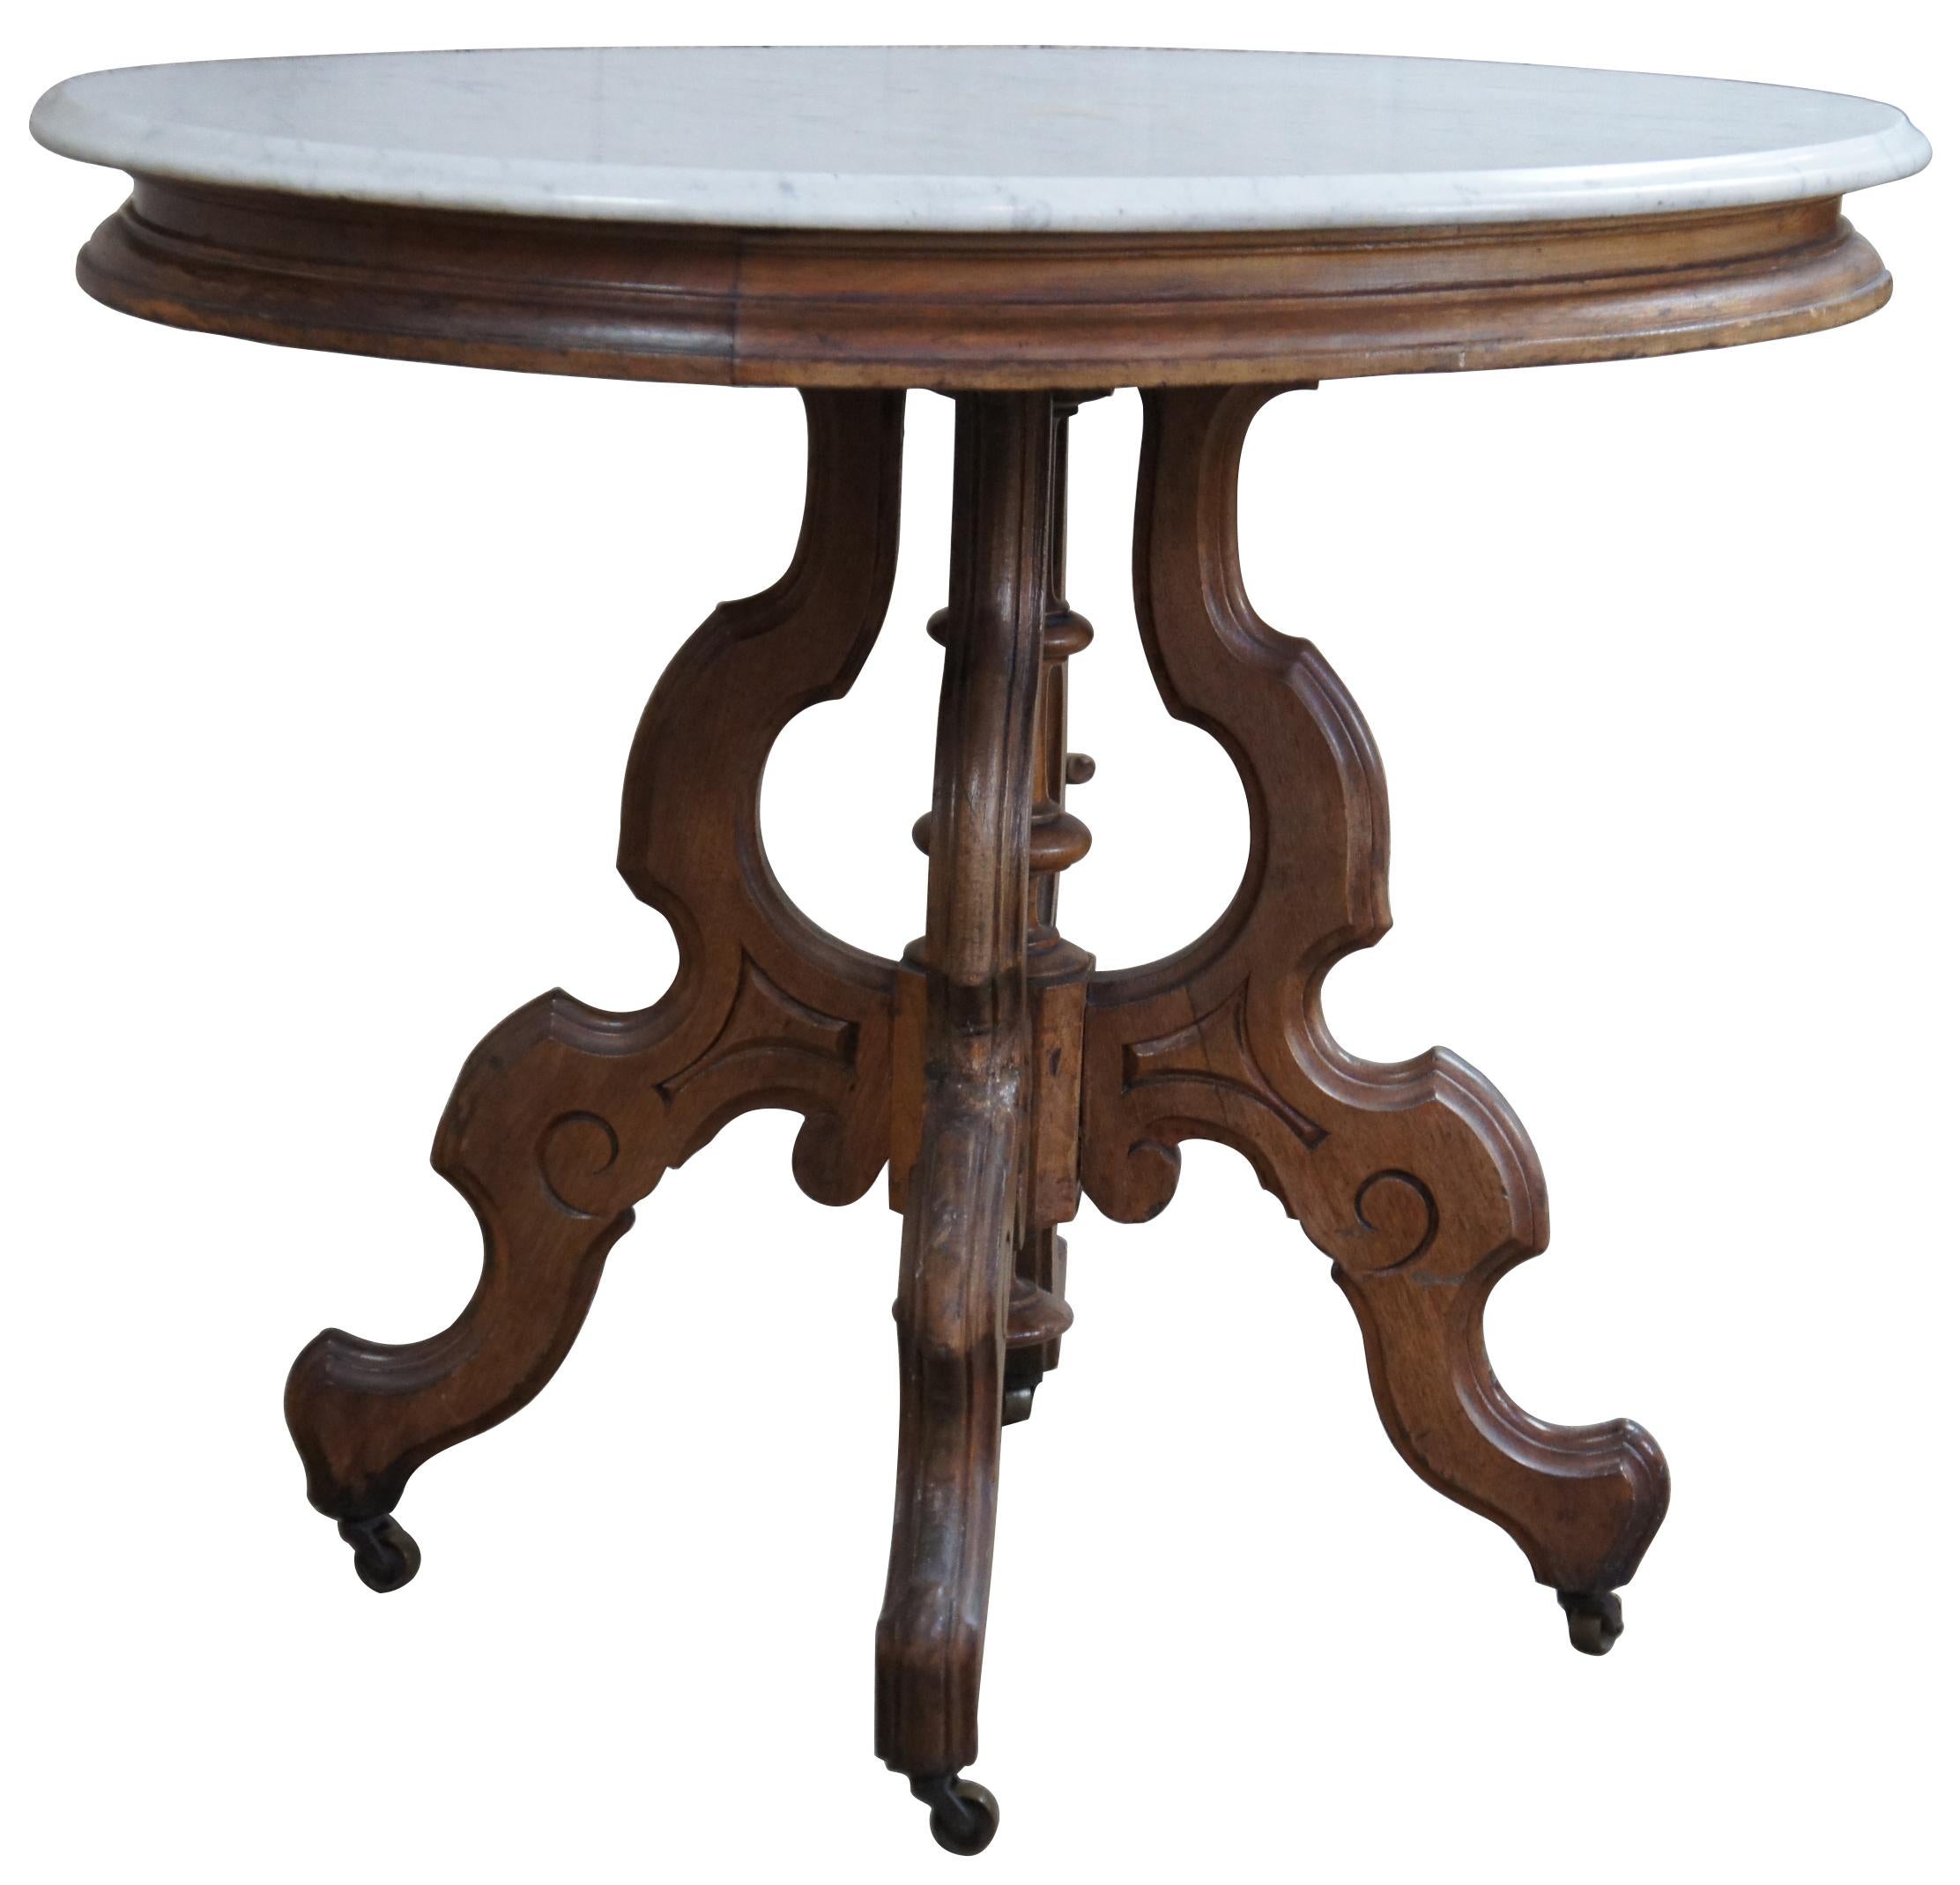 Antique Victorian Eastlake parlor table, circa 1880s. Made from walnut with an oval white marble top. Base features a turned center support surrounded by four serpentine carved legs leading to castors. 
  